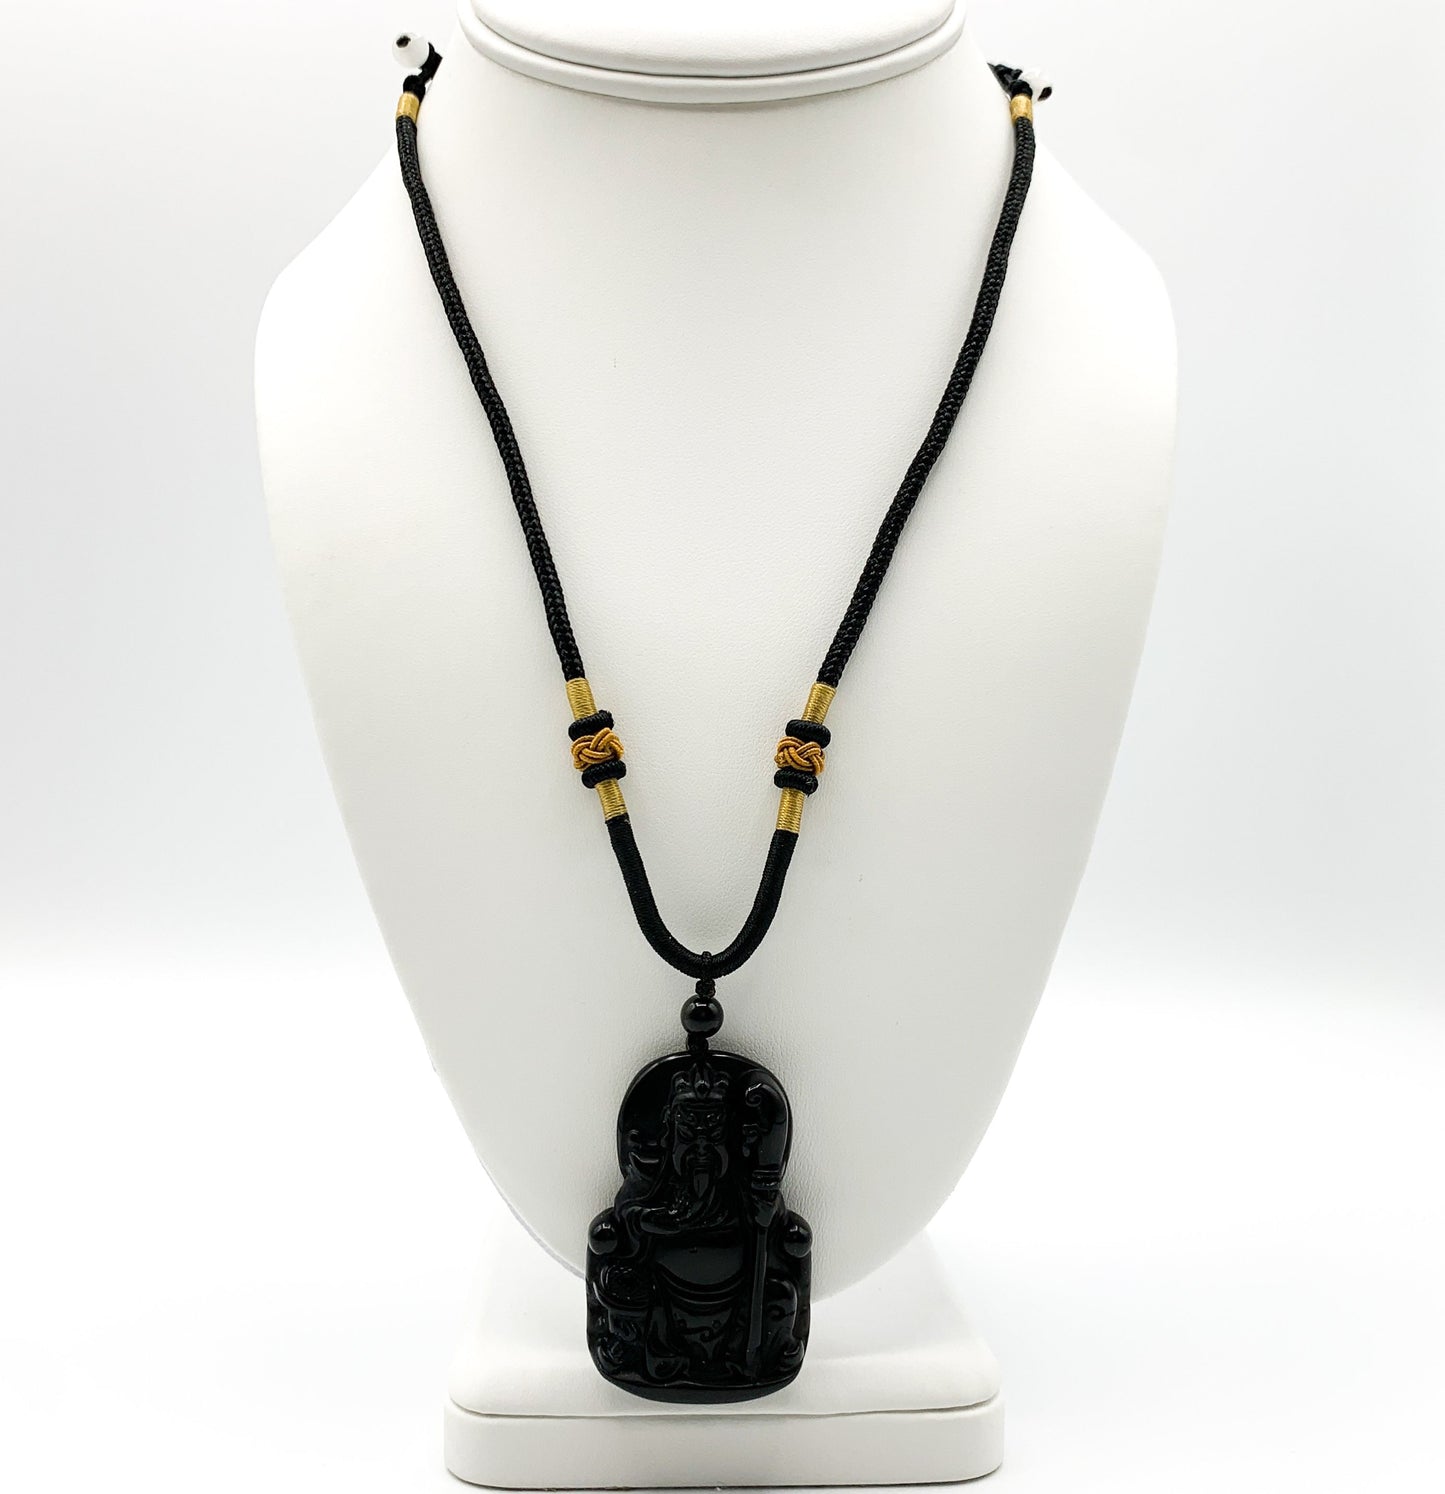 Obsidian Guan Yu Guan Gong God of War Carved Pendant Necklace , YW-0110-1646259007 - AriaDesignCollection